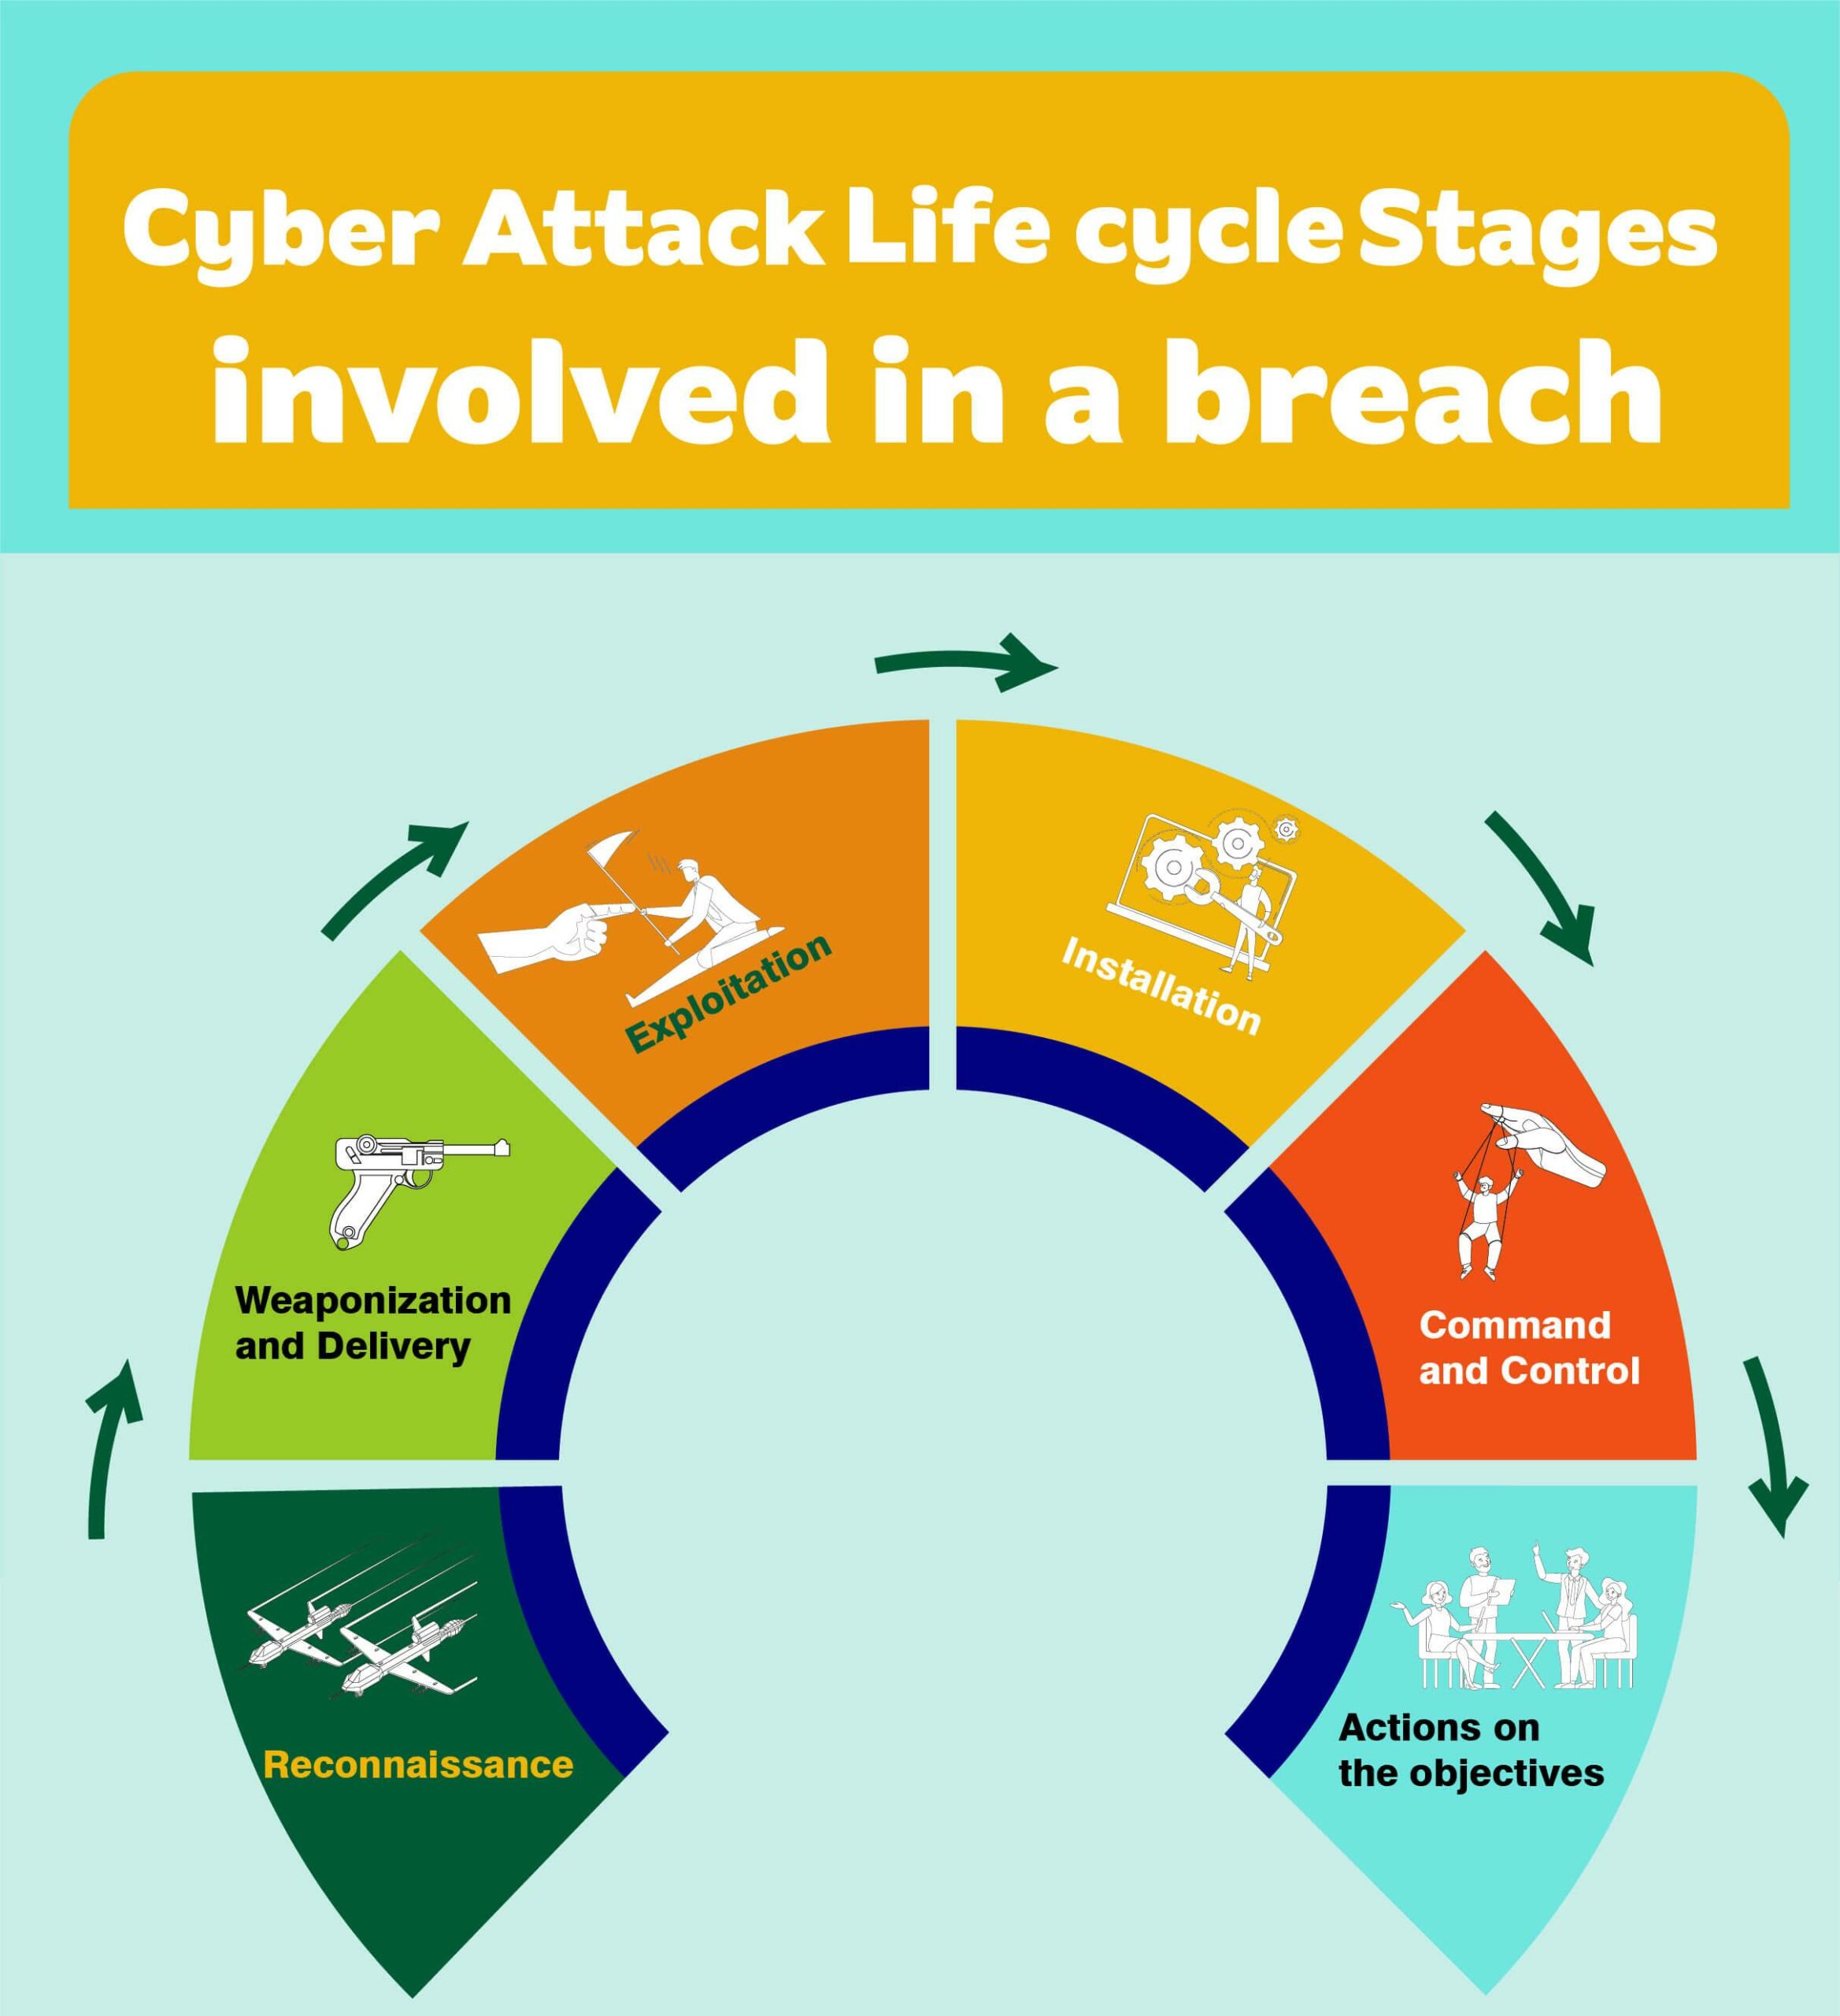 Cyber Attack Lifecycle Stages Involved in a Breach